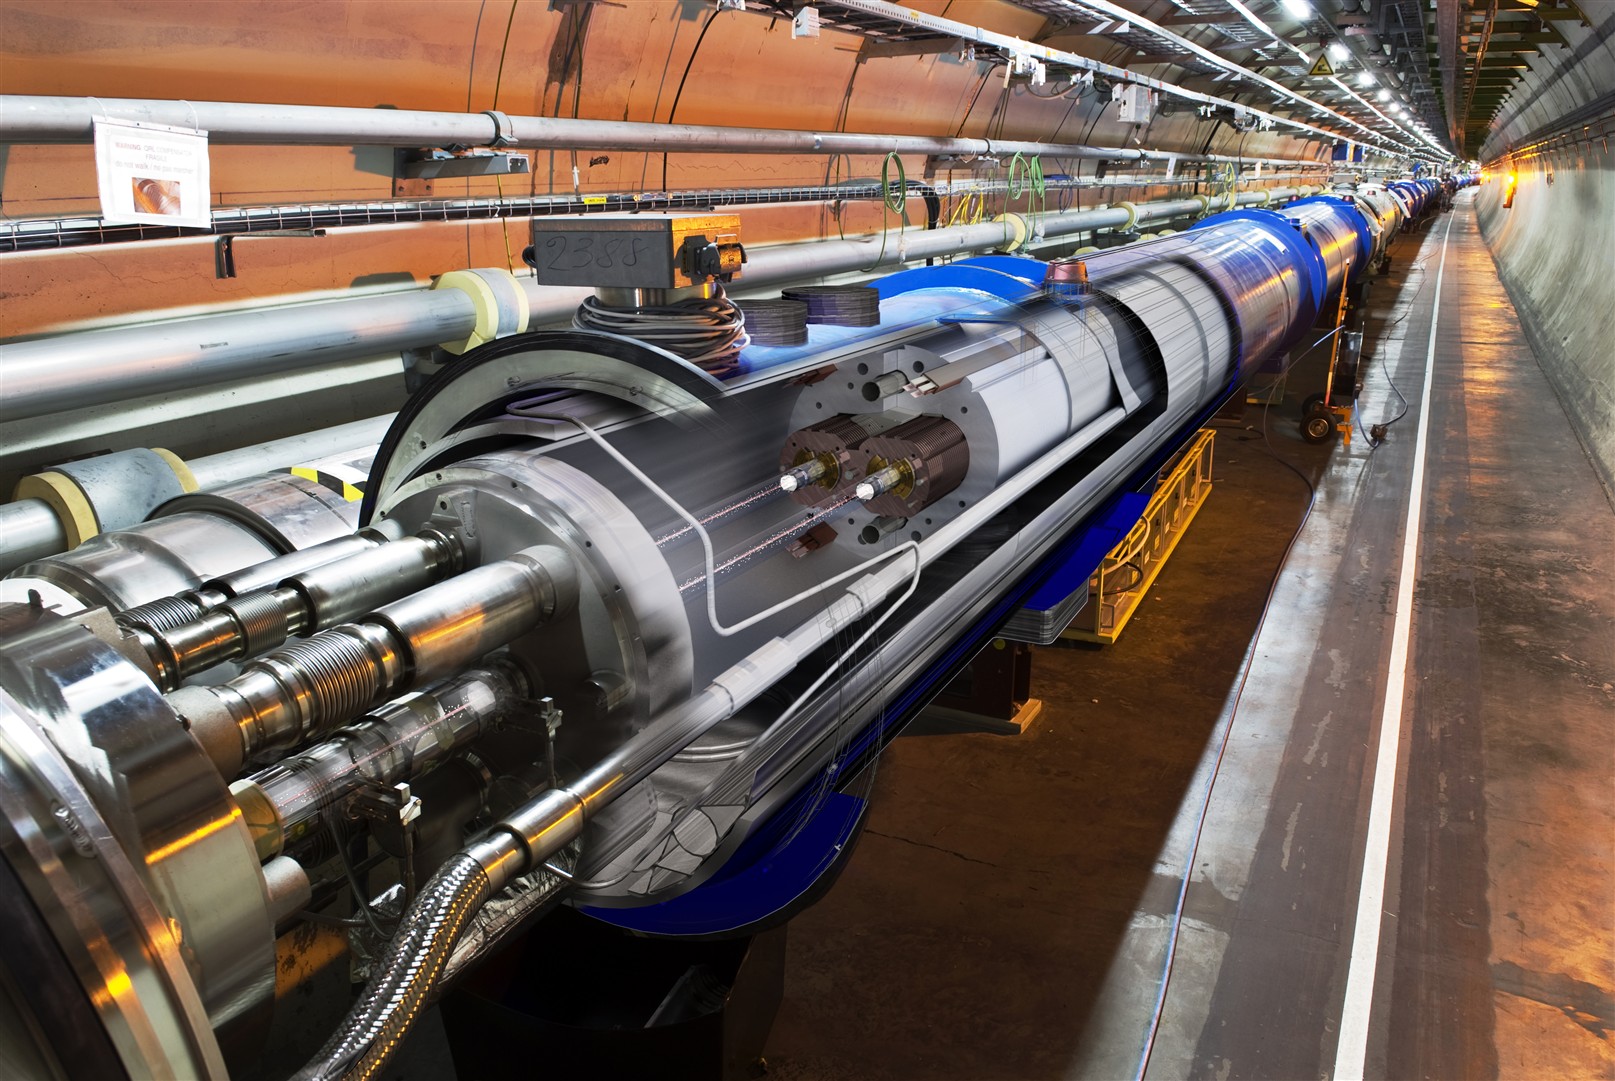 3d view photo of the LHC Machine.